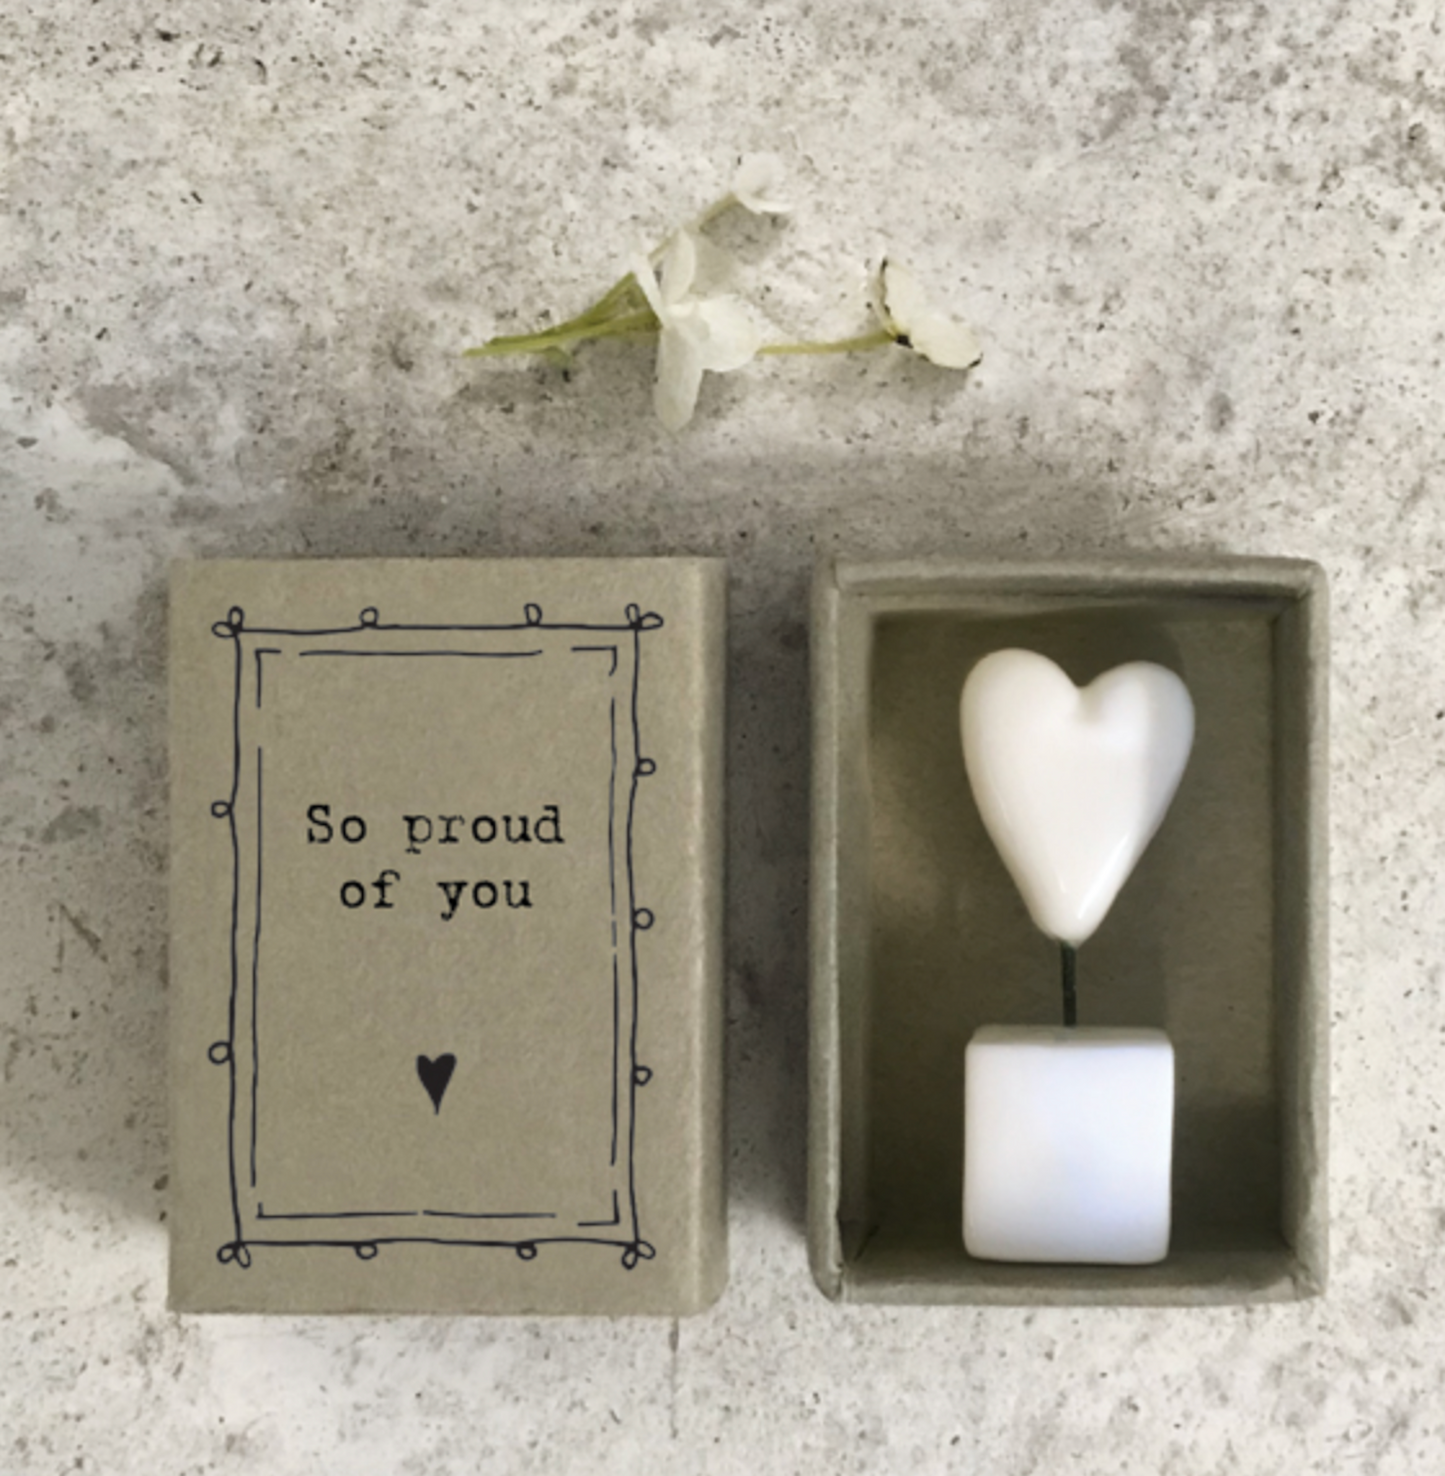 Porcelain Heart Matchbox Gift, So Proud Of You, Thinking Of You,  Gifts For Friends, Difficult Time Gifts, Small Keepsake, East Of India